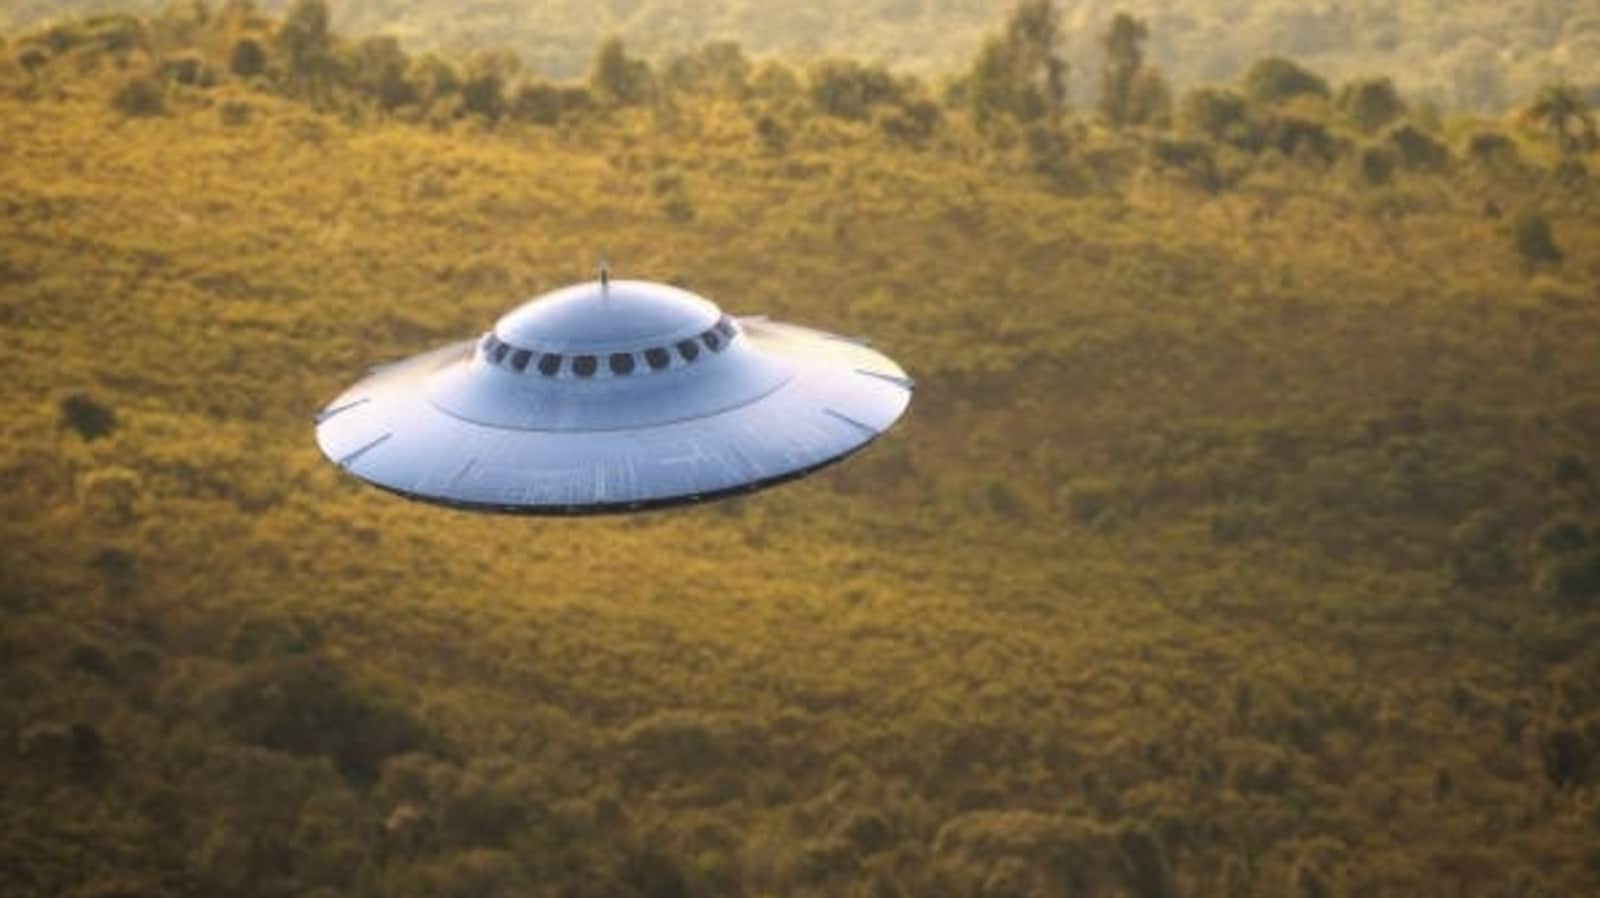 Is Hawaii a hot spot for UFOs? New documentary uncovers surreal details